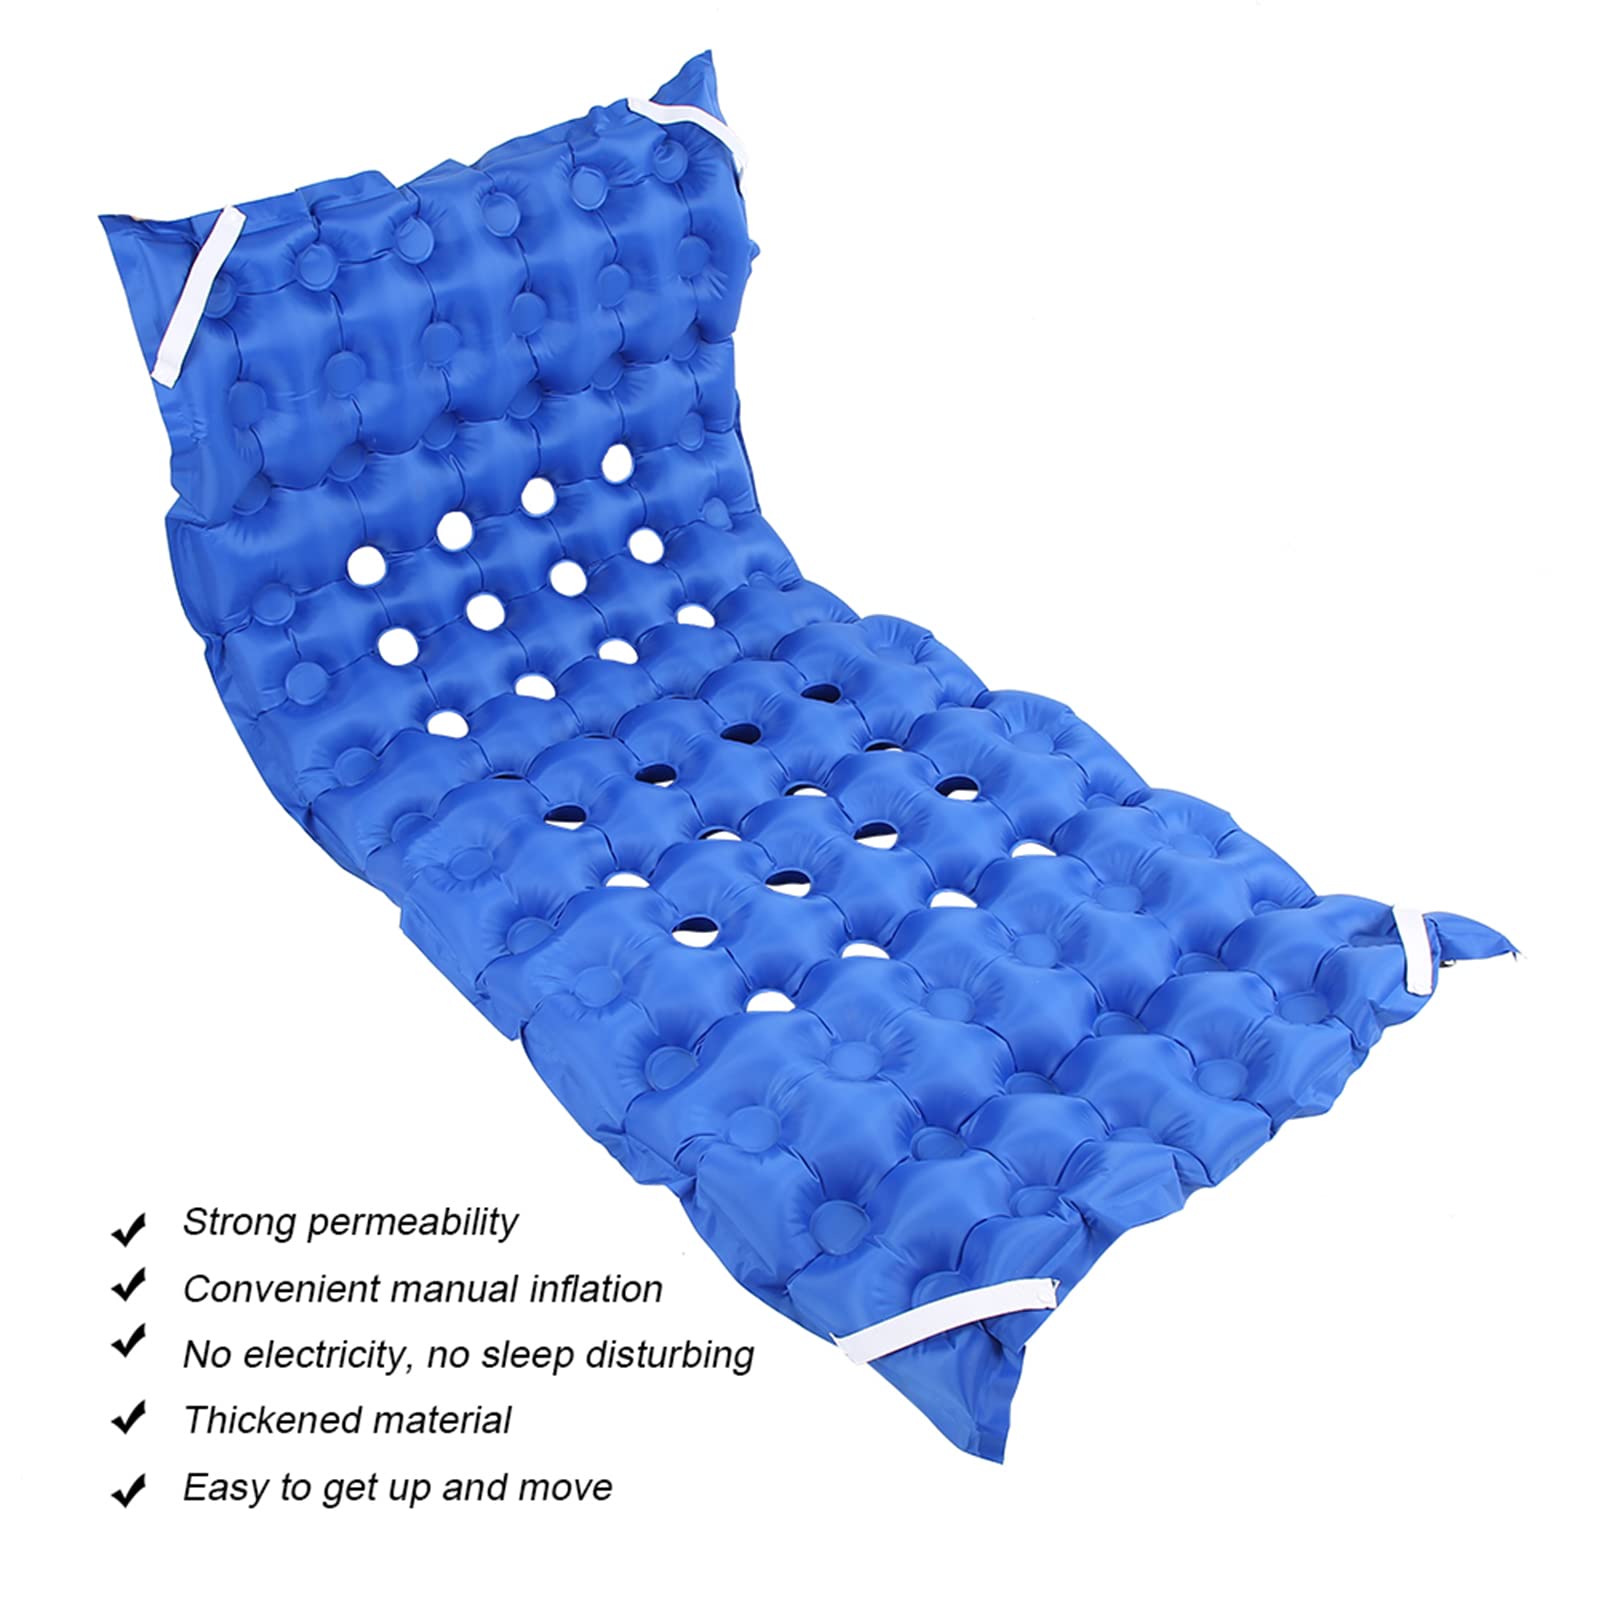 Luqeeg Alternating Pressure Mattress for Bed Sores, Bed Pad to Prevent Bed Sores for Hospital Bed, Bed Sore Prevention, Bedridden Treatment, Inflatable Air Mattress with Quiet Air Pump, 83.9 x 39in